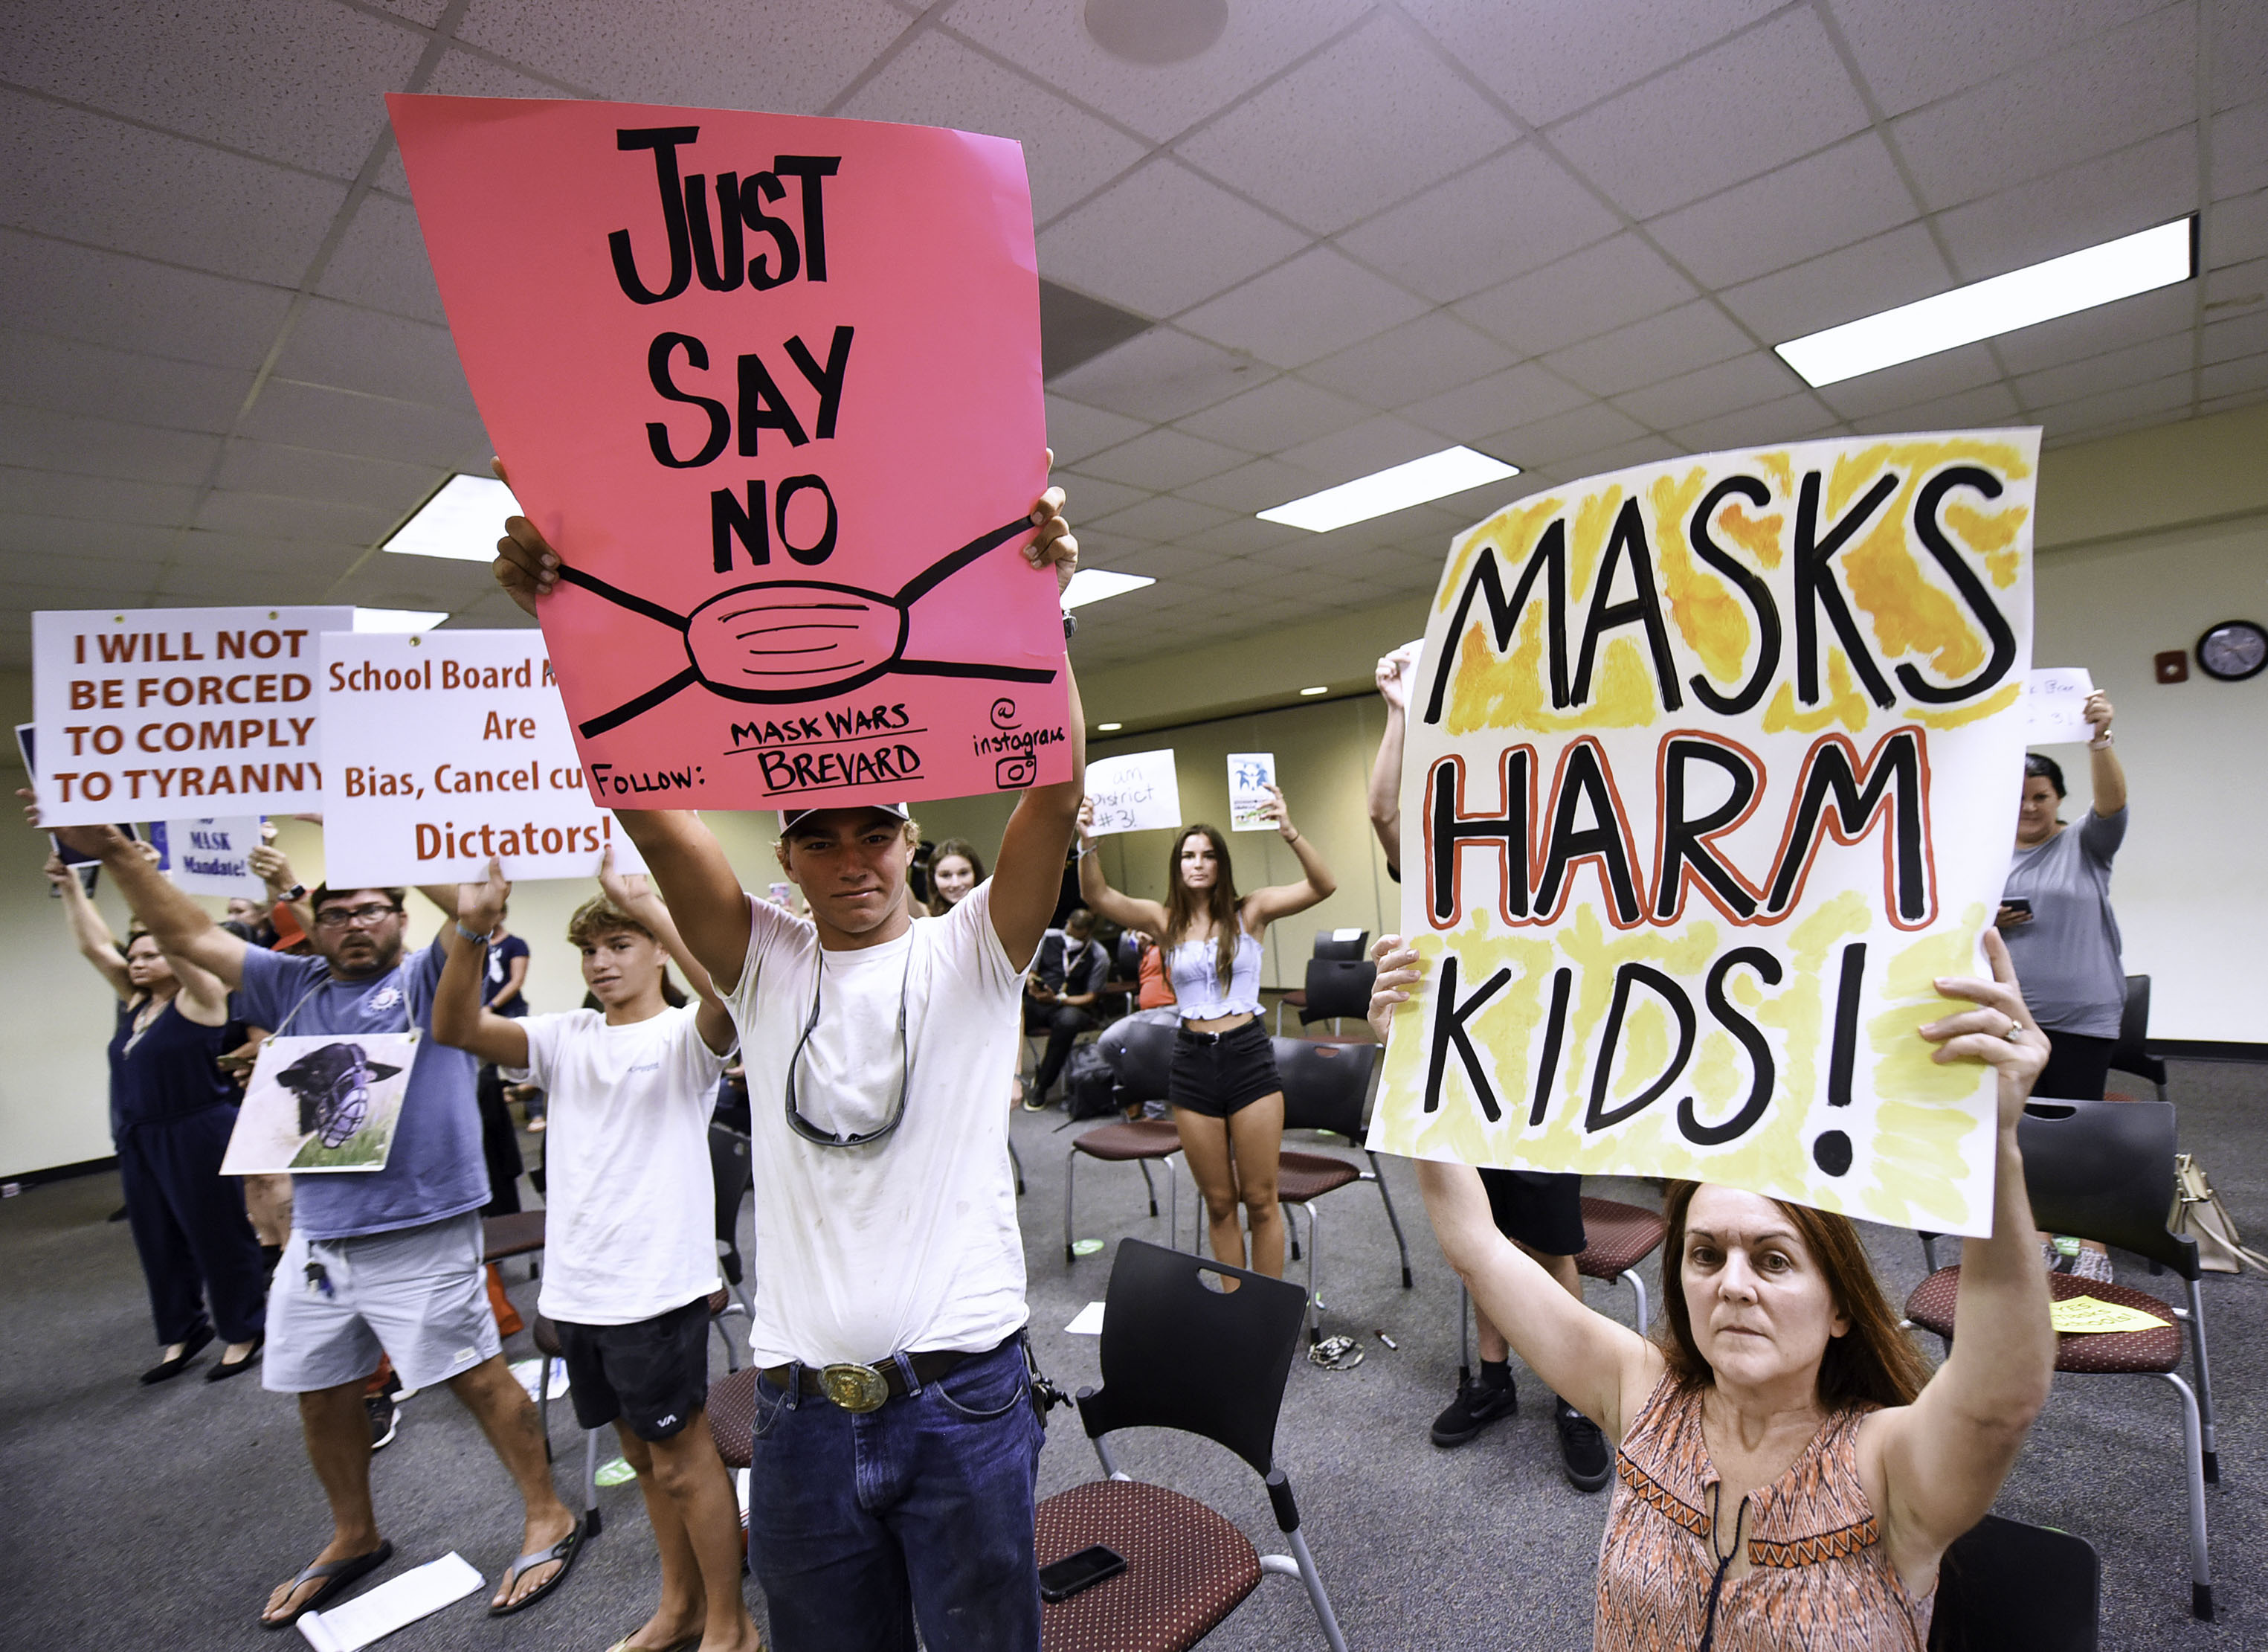 People demonstrate at a Brevard County School Board meeting in Viera, Fla., over whether face masks should be mandatory in school on Aug. 30, 2021. (Paul Hennessy—SOPA Images/Getty Images)